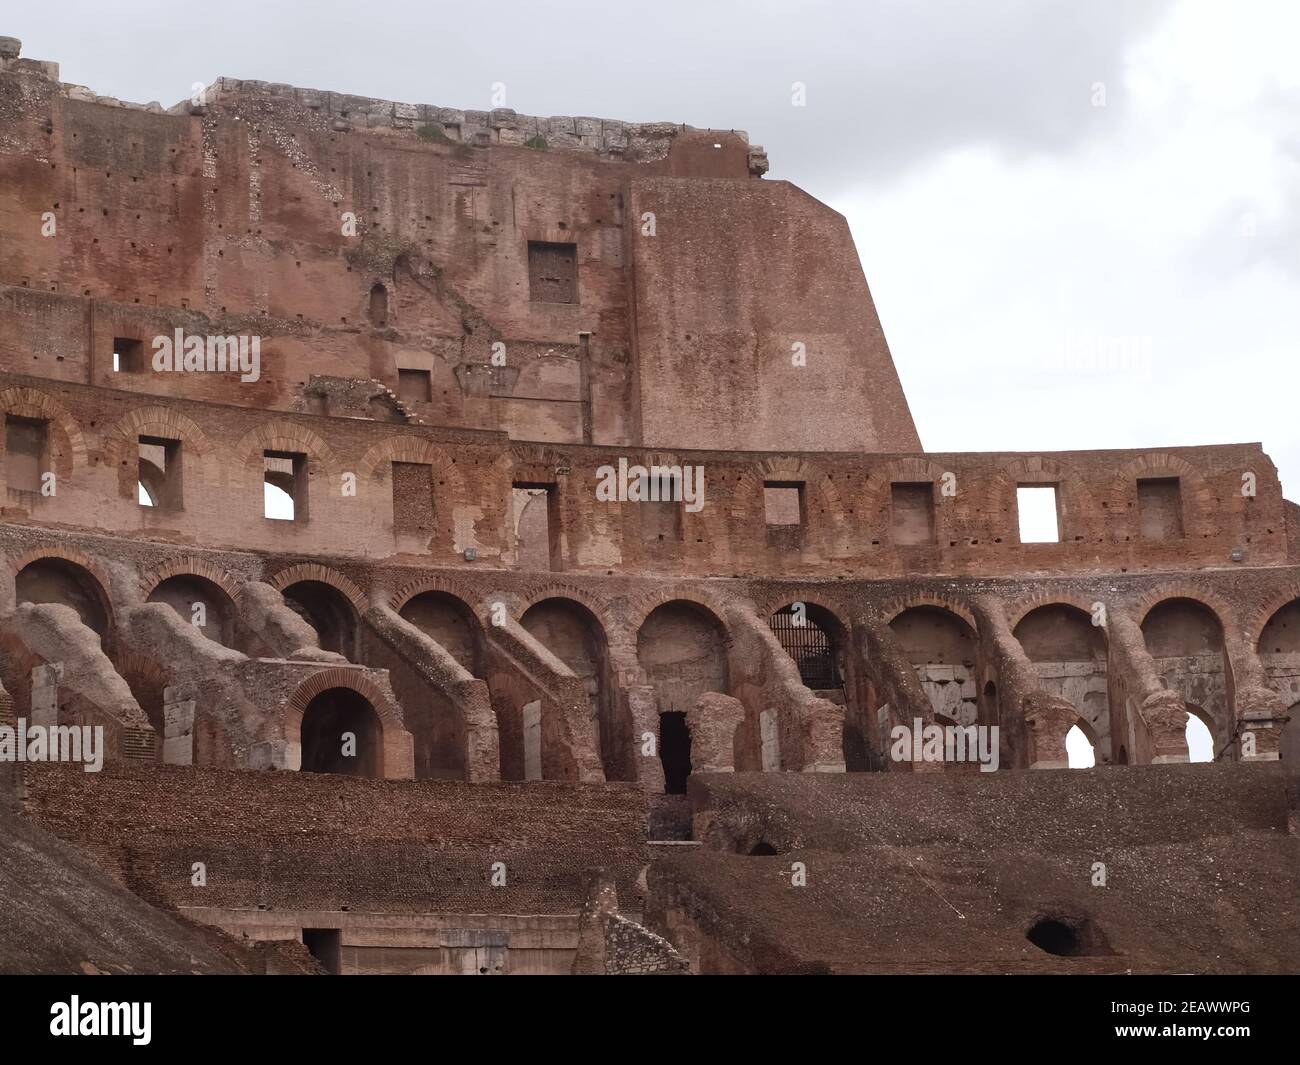 Inside te famous amphitheater Colosseum in rome Stock Photo